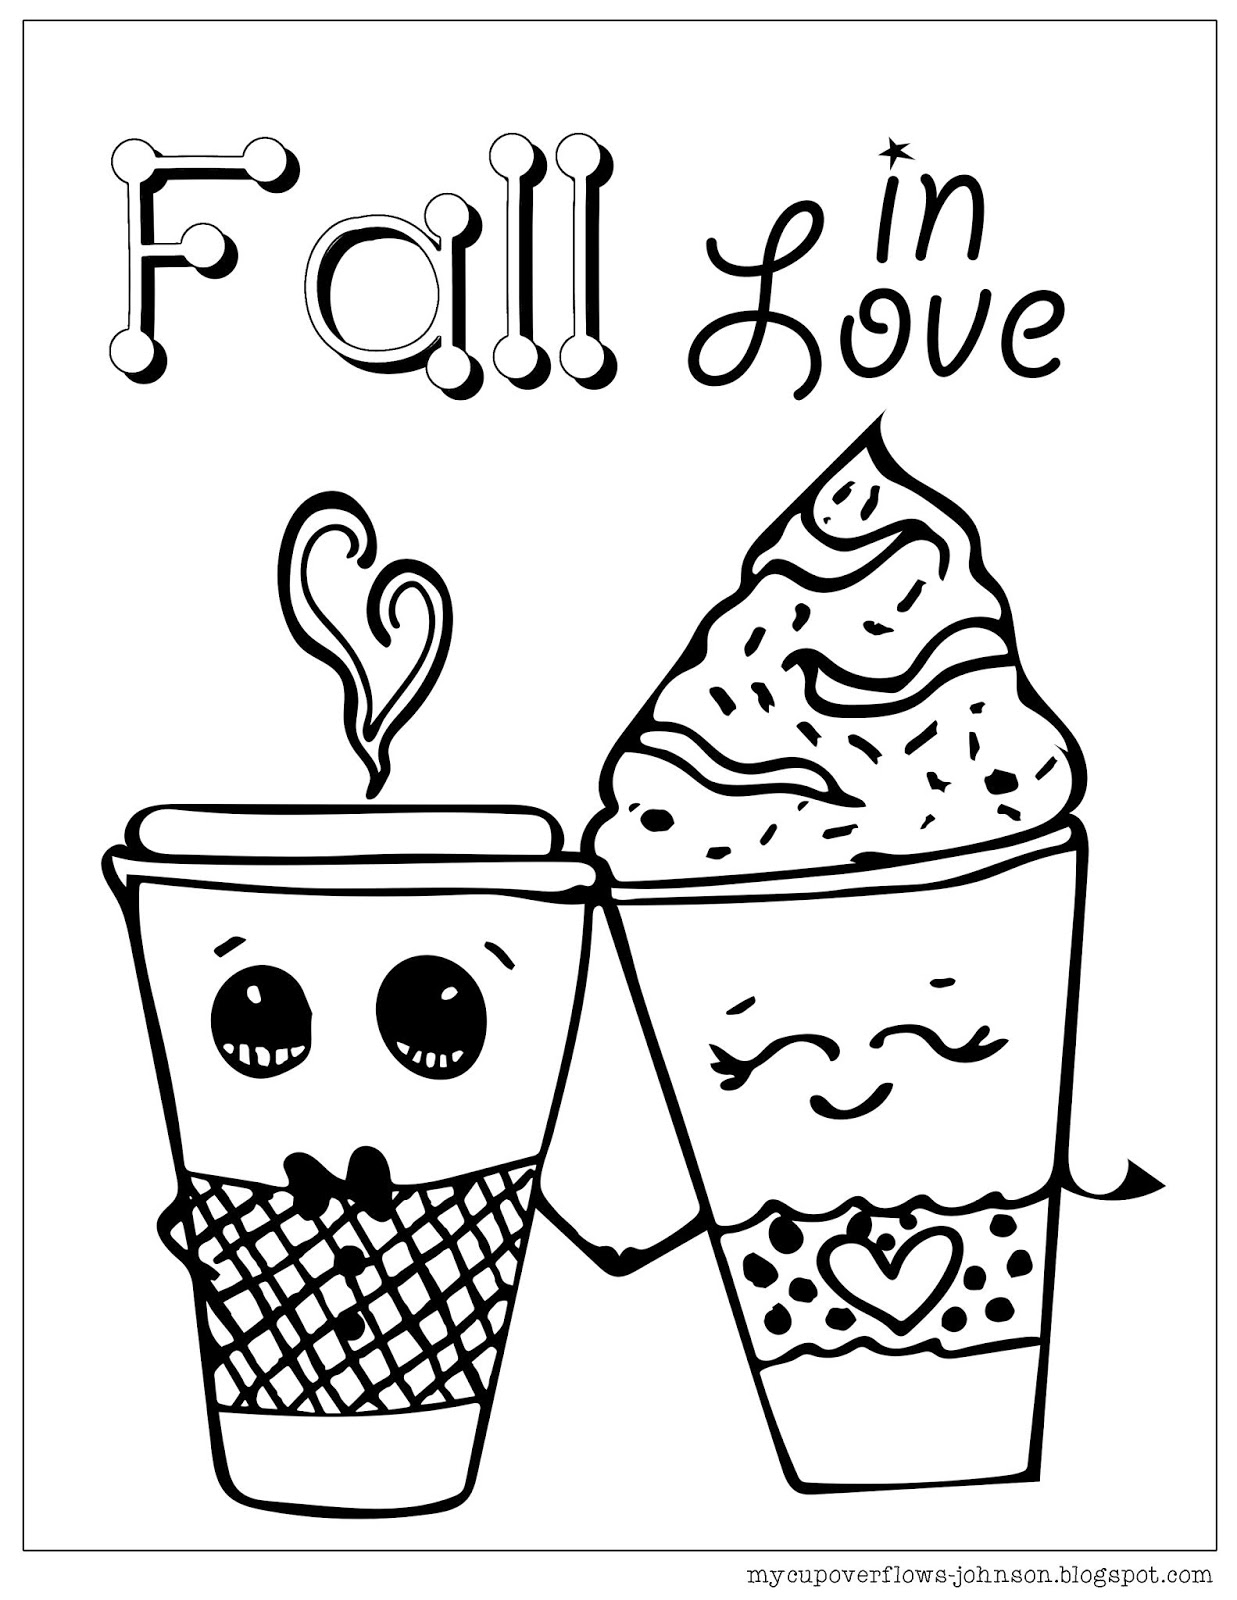 My Cup Overflows: Fall in Love Coloring Page